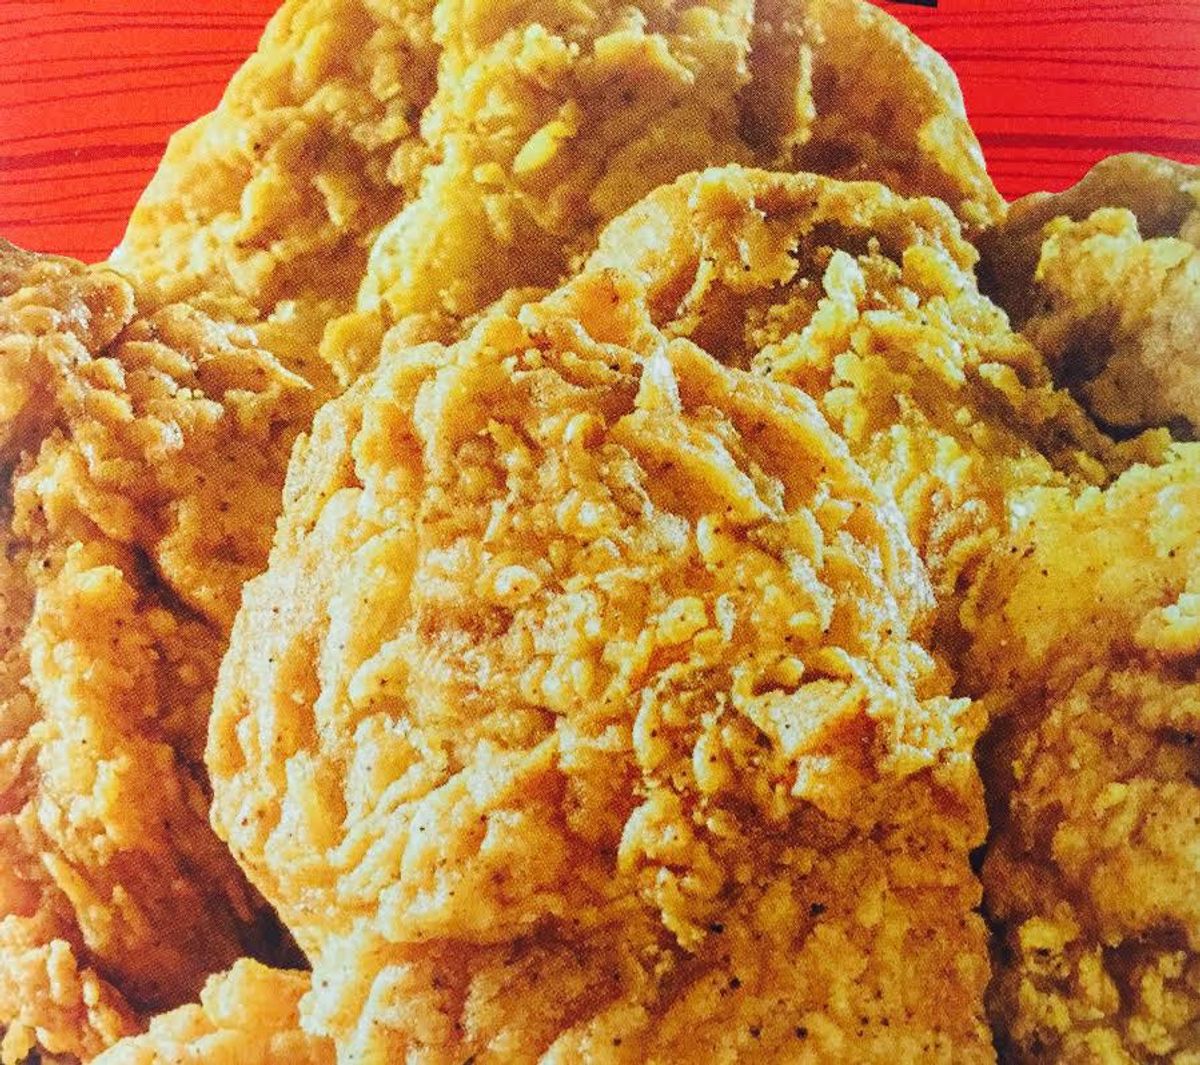 It's Fried Chicken Time!